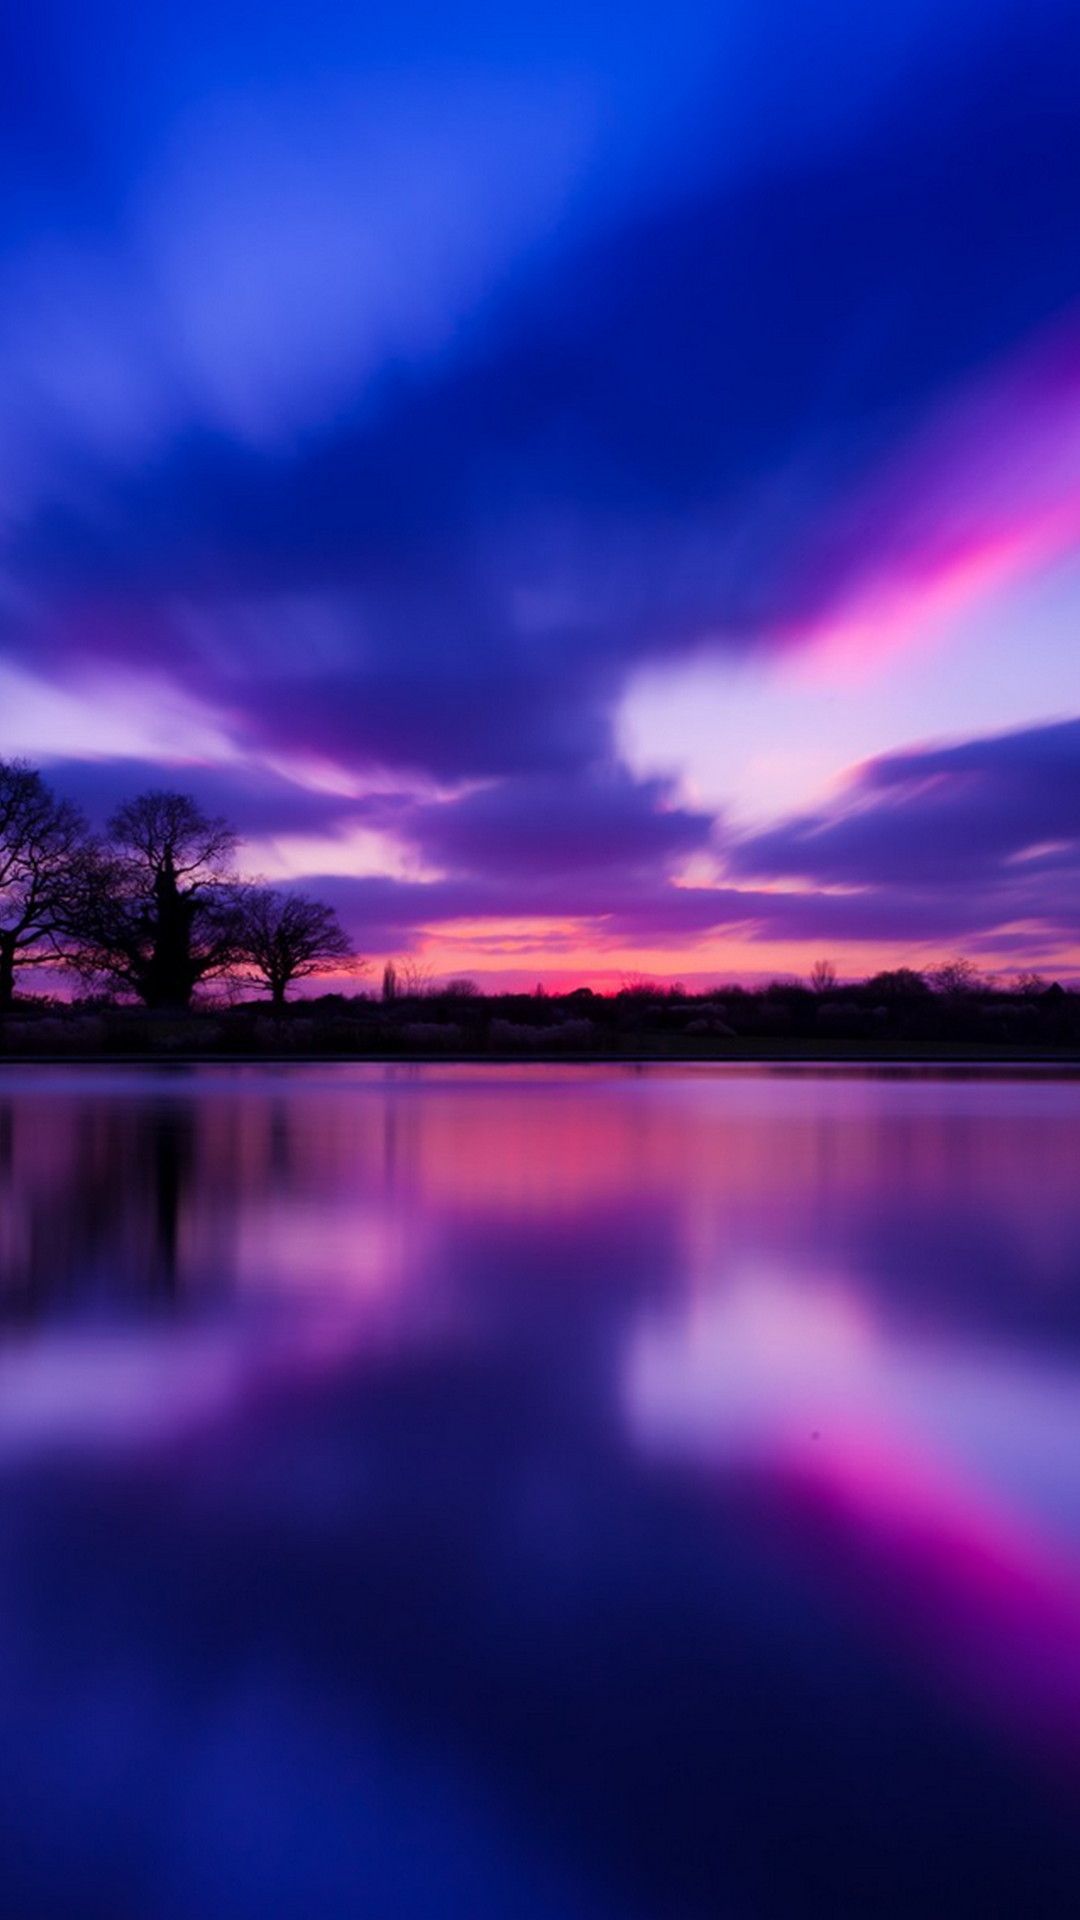 A sunset over the water with trees in it - Cute purple